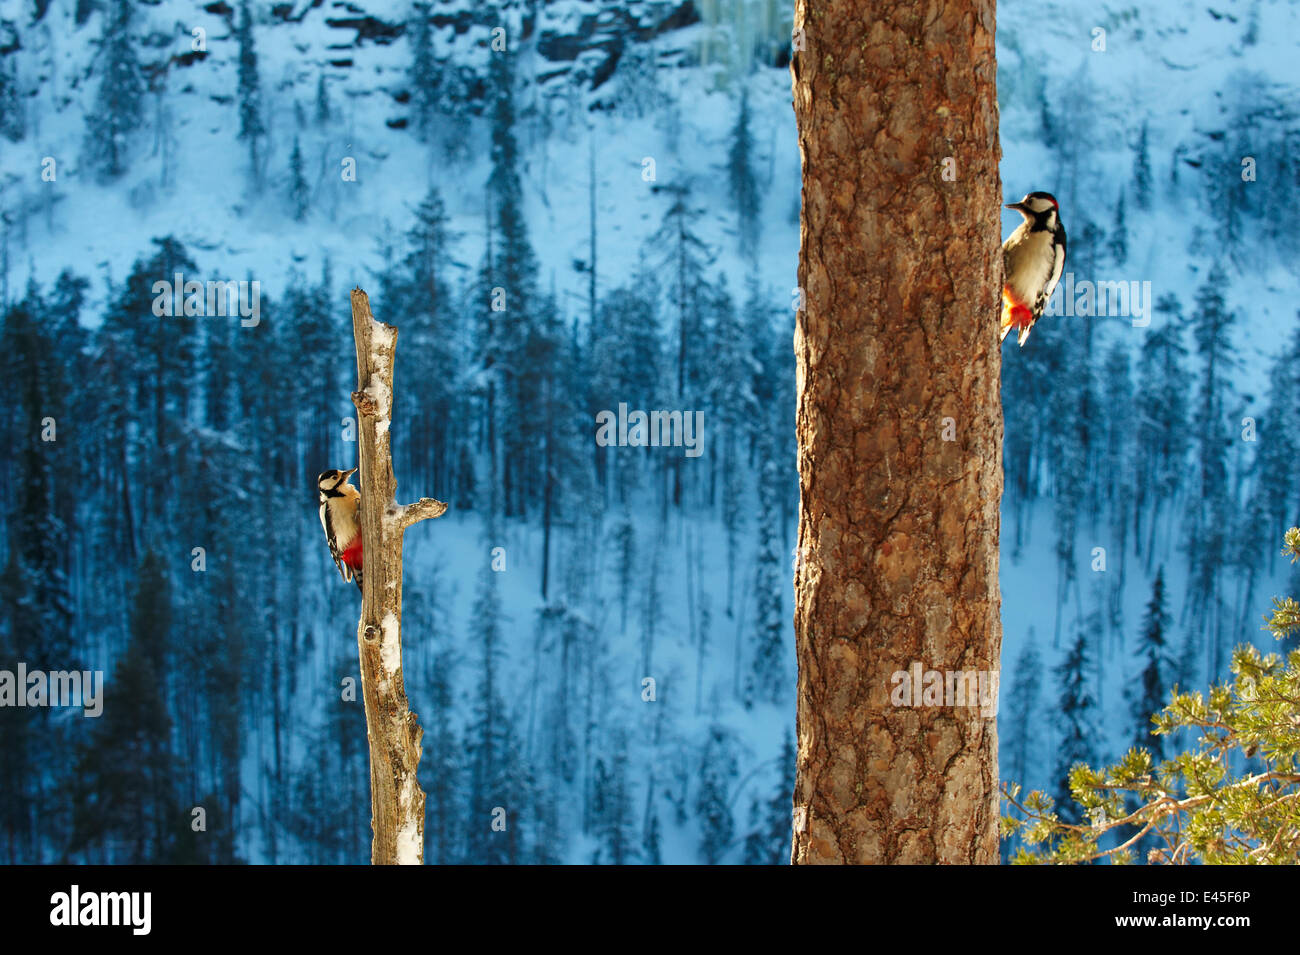 Two Great spotted woodpeckers (Dendrocopos major) on tree trunks, Korouma, Posio, Finland, February 2009 Stock Photo